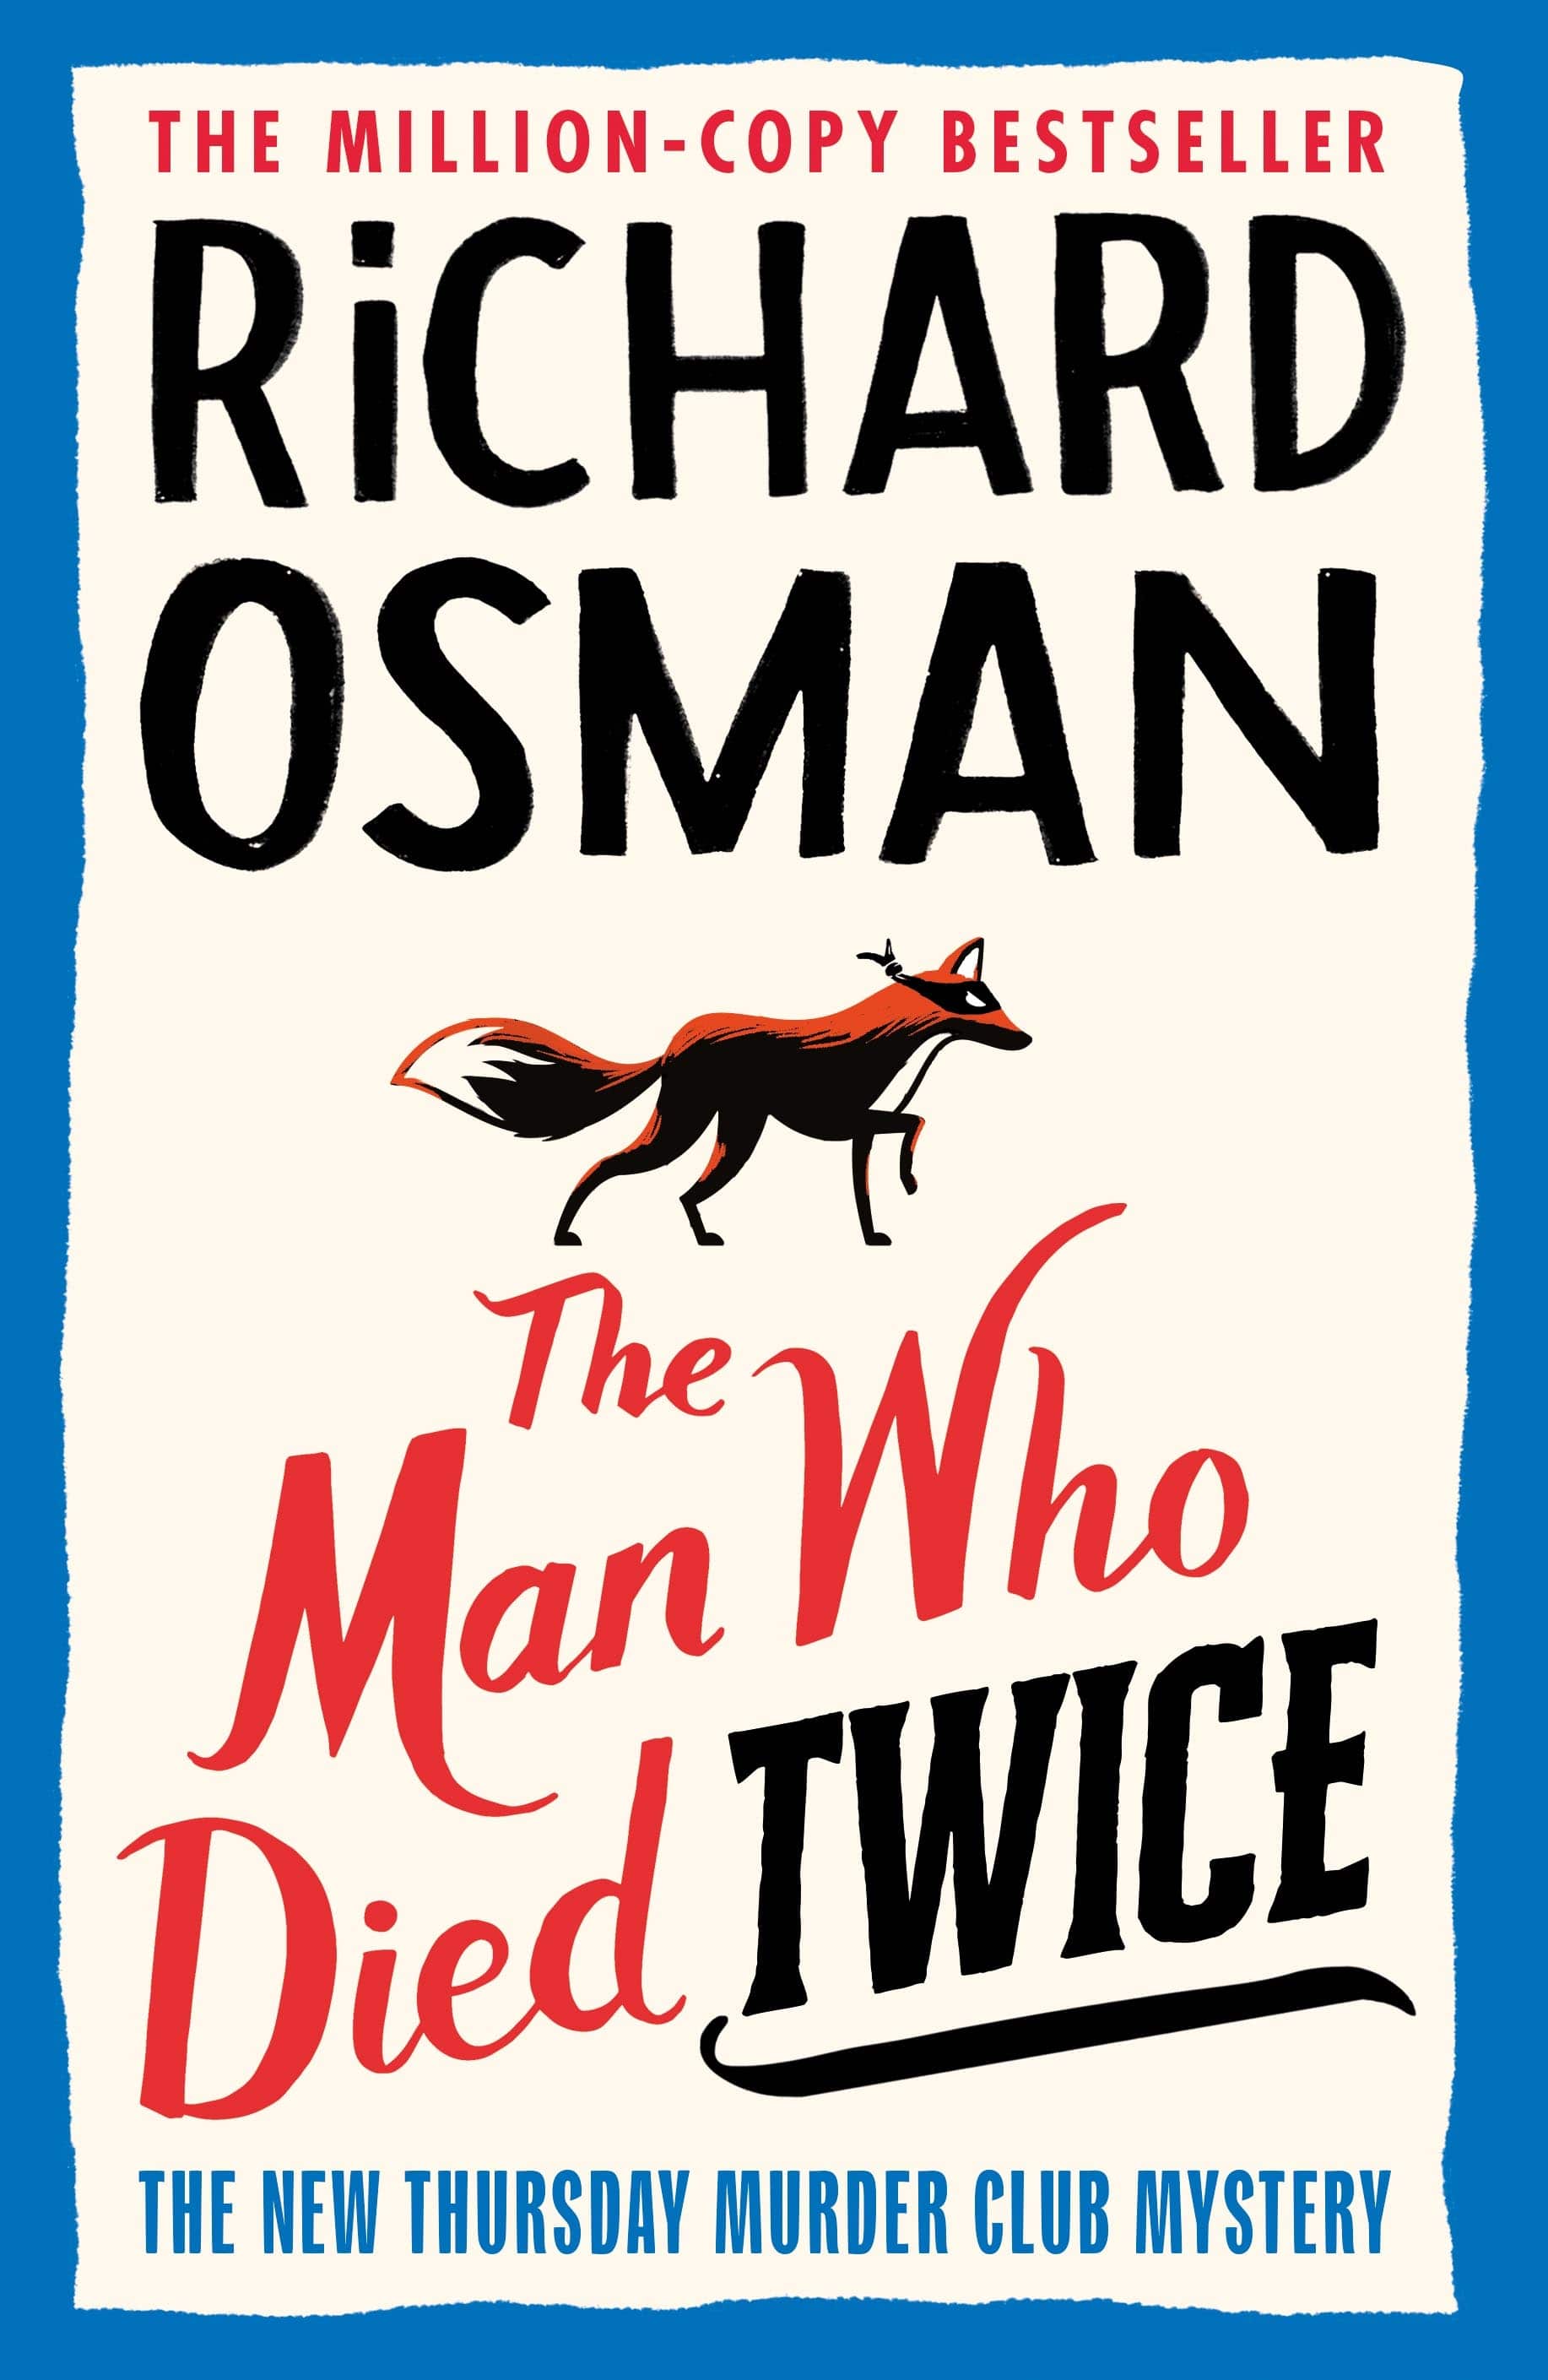 Richard Osman's Thursday Murder Club books in order: The Man Who Died Twice, book 2